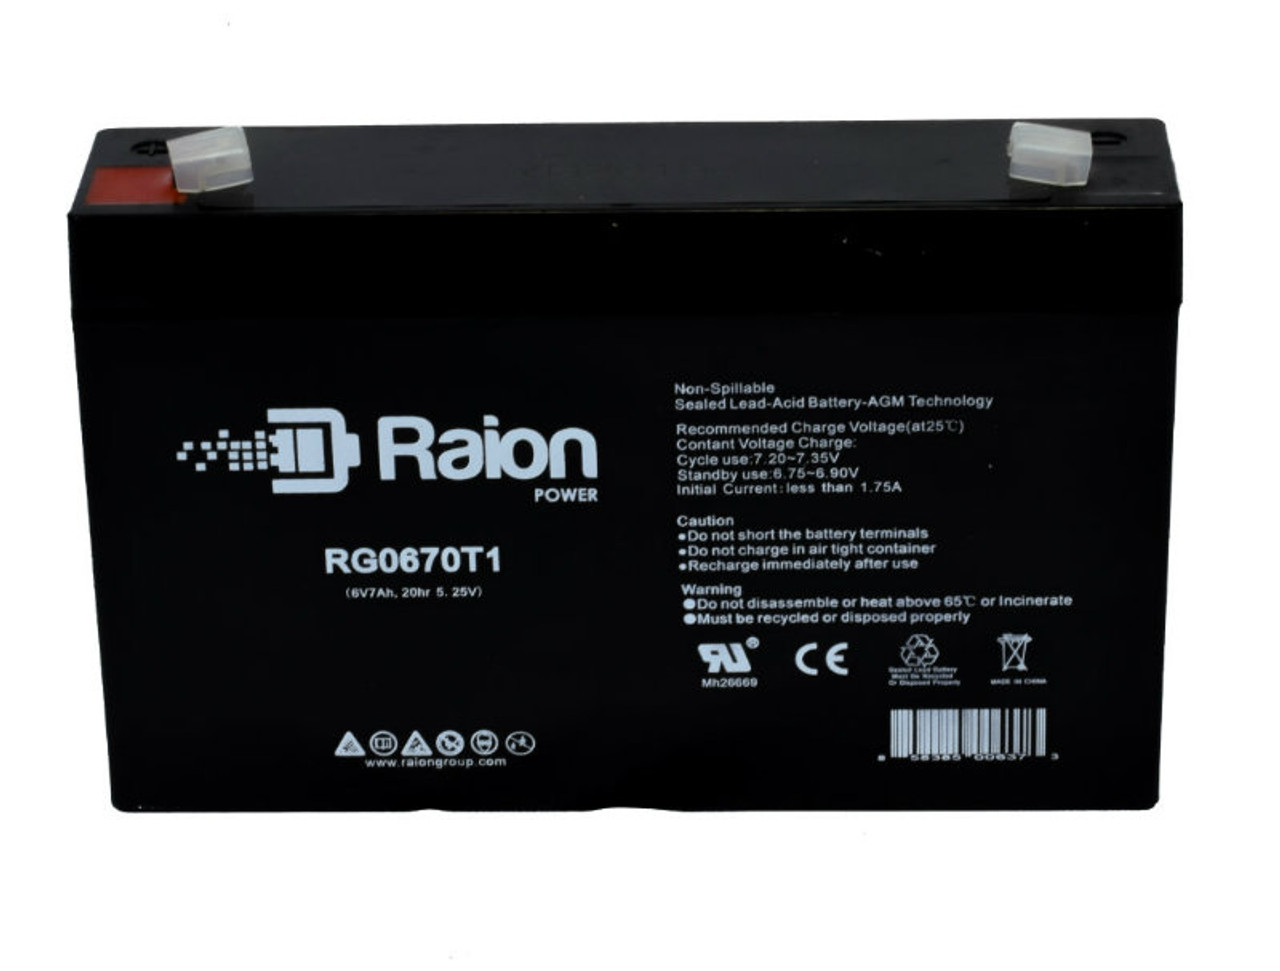 Raion Power RG0670T1 Replacement Battery Cartridge for Ivy Biomedical System 701